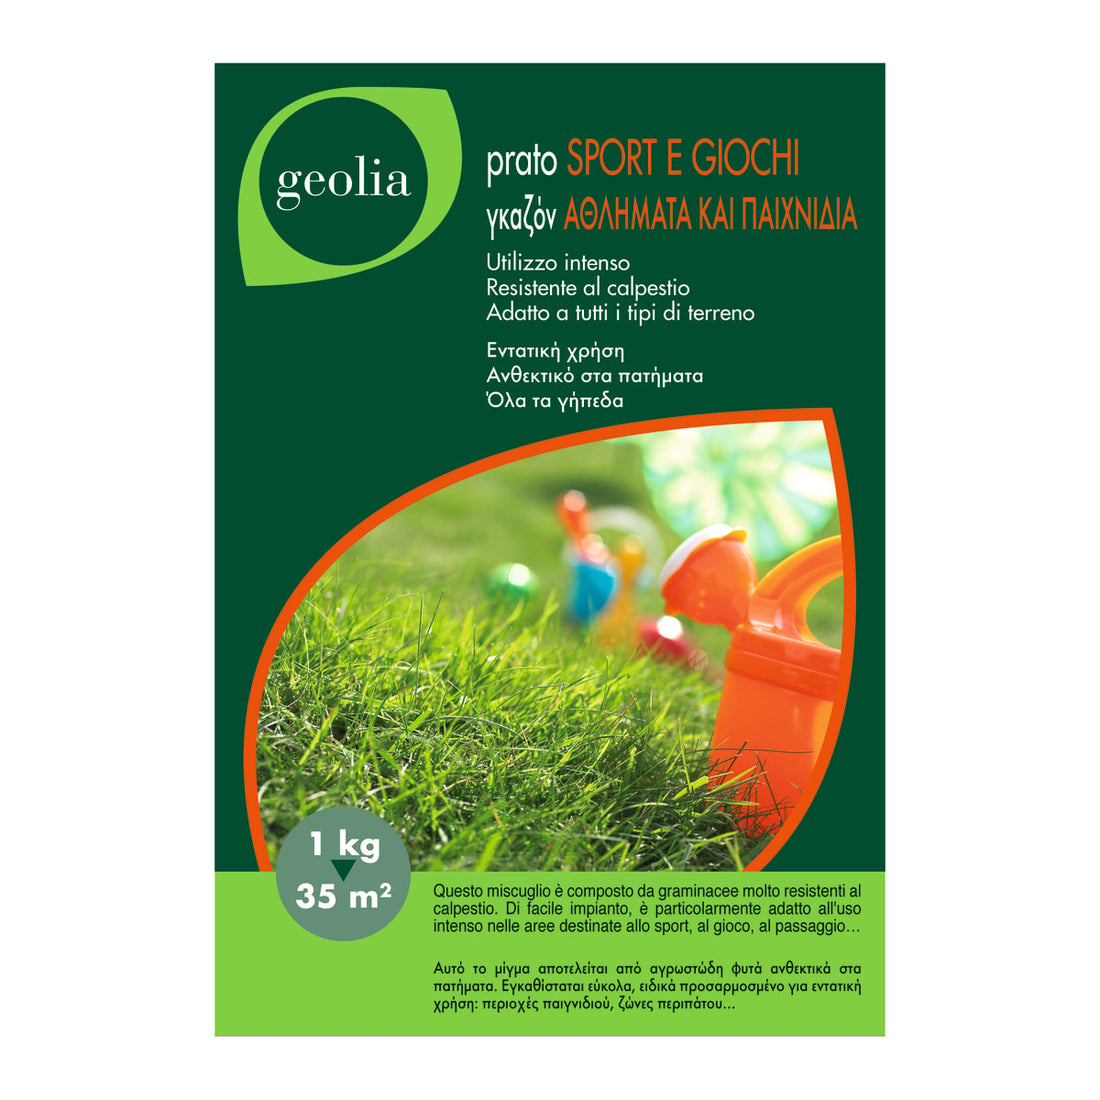 SPORTS AND GAMES LAWN SEEDS 1 KG GEOLIA